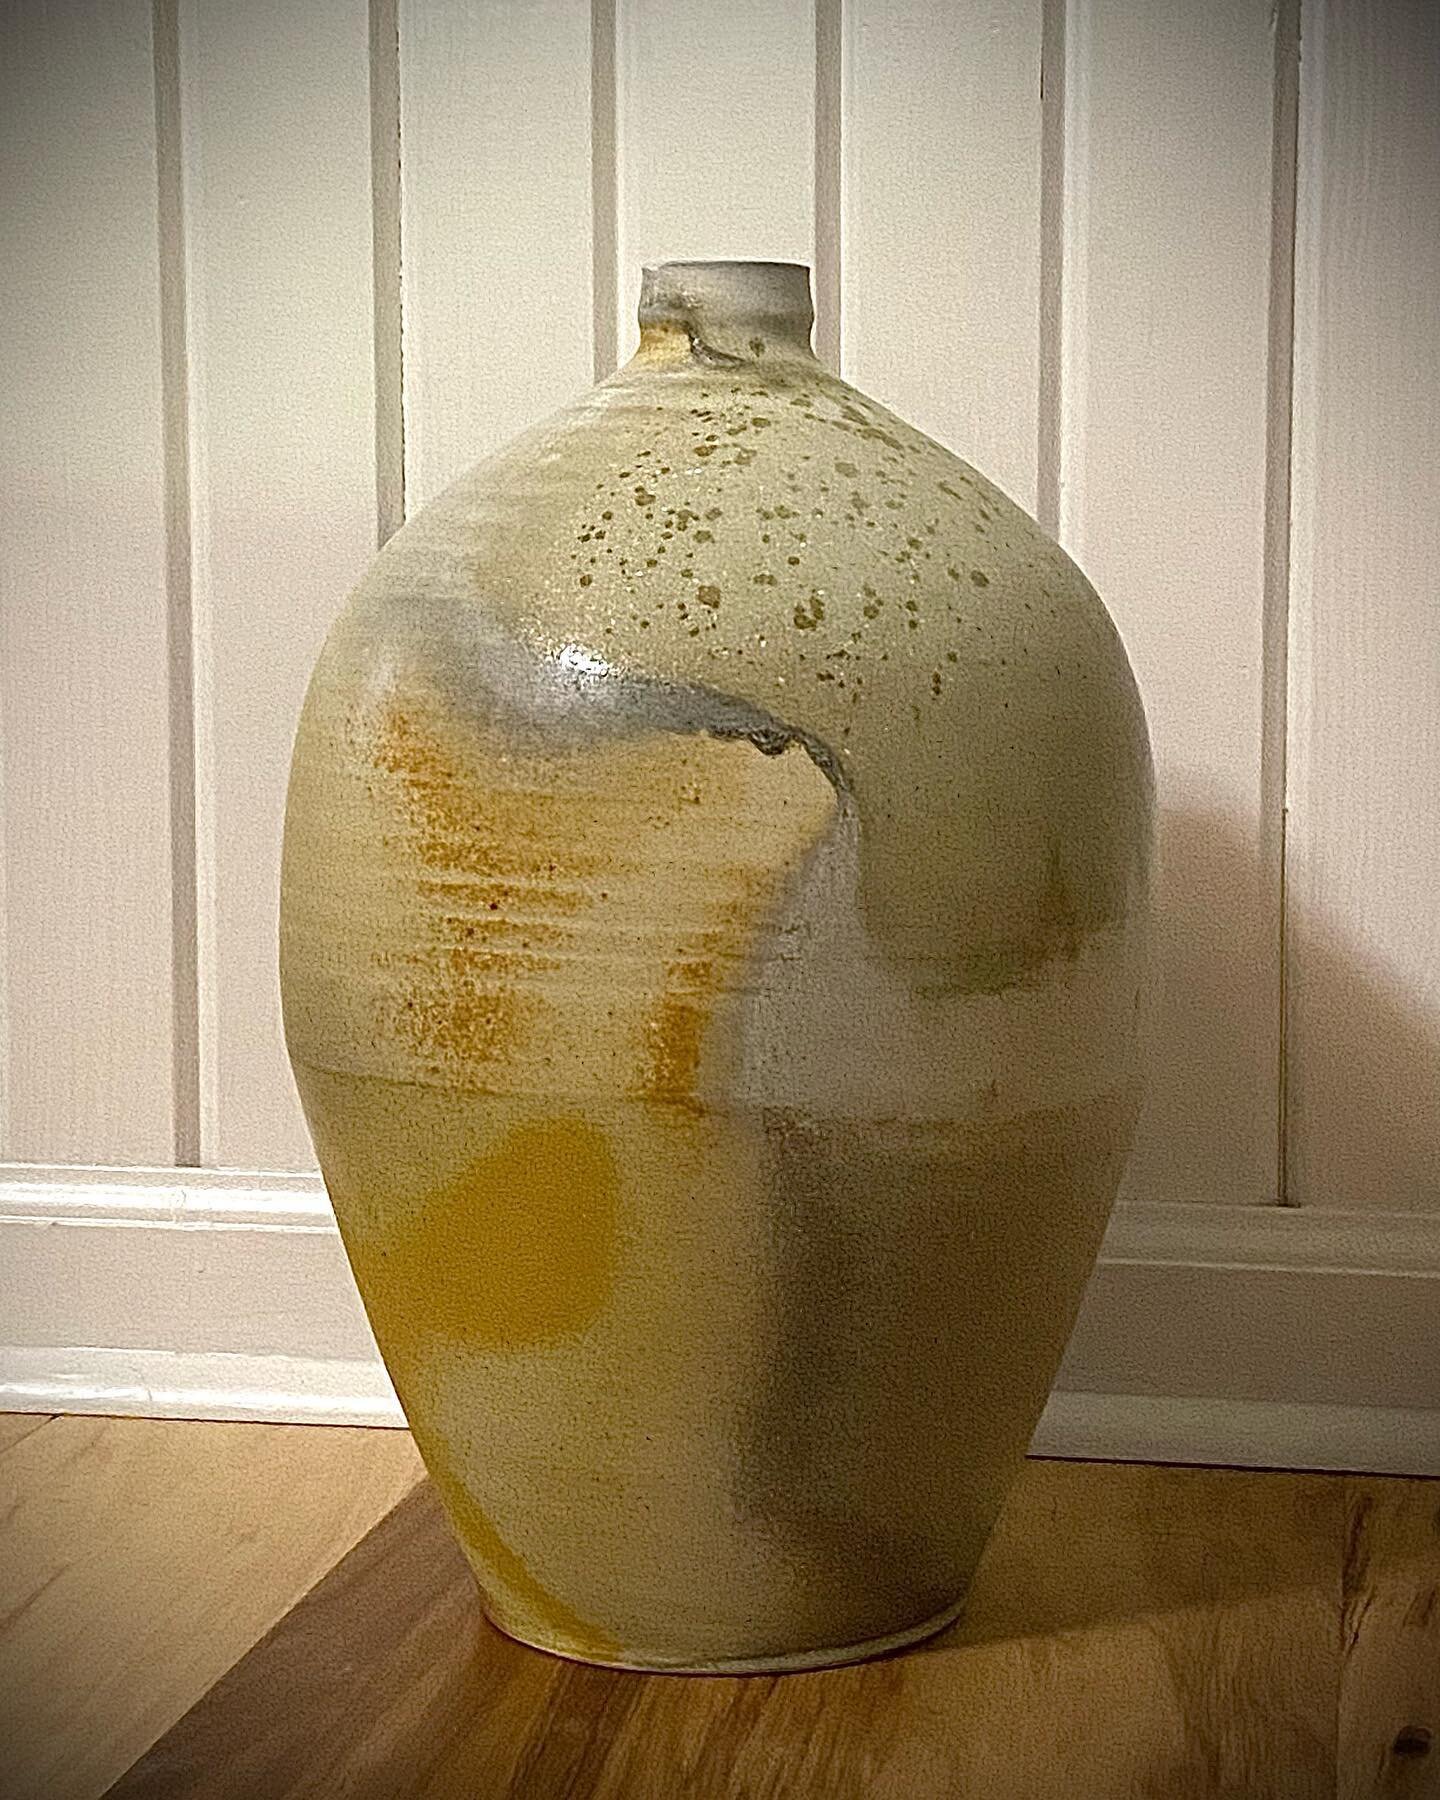 One last piece from my recent firing, a large bottle. Many of these will be available on my website on November 12th, stay tuned! 🤘